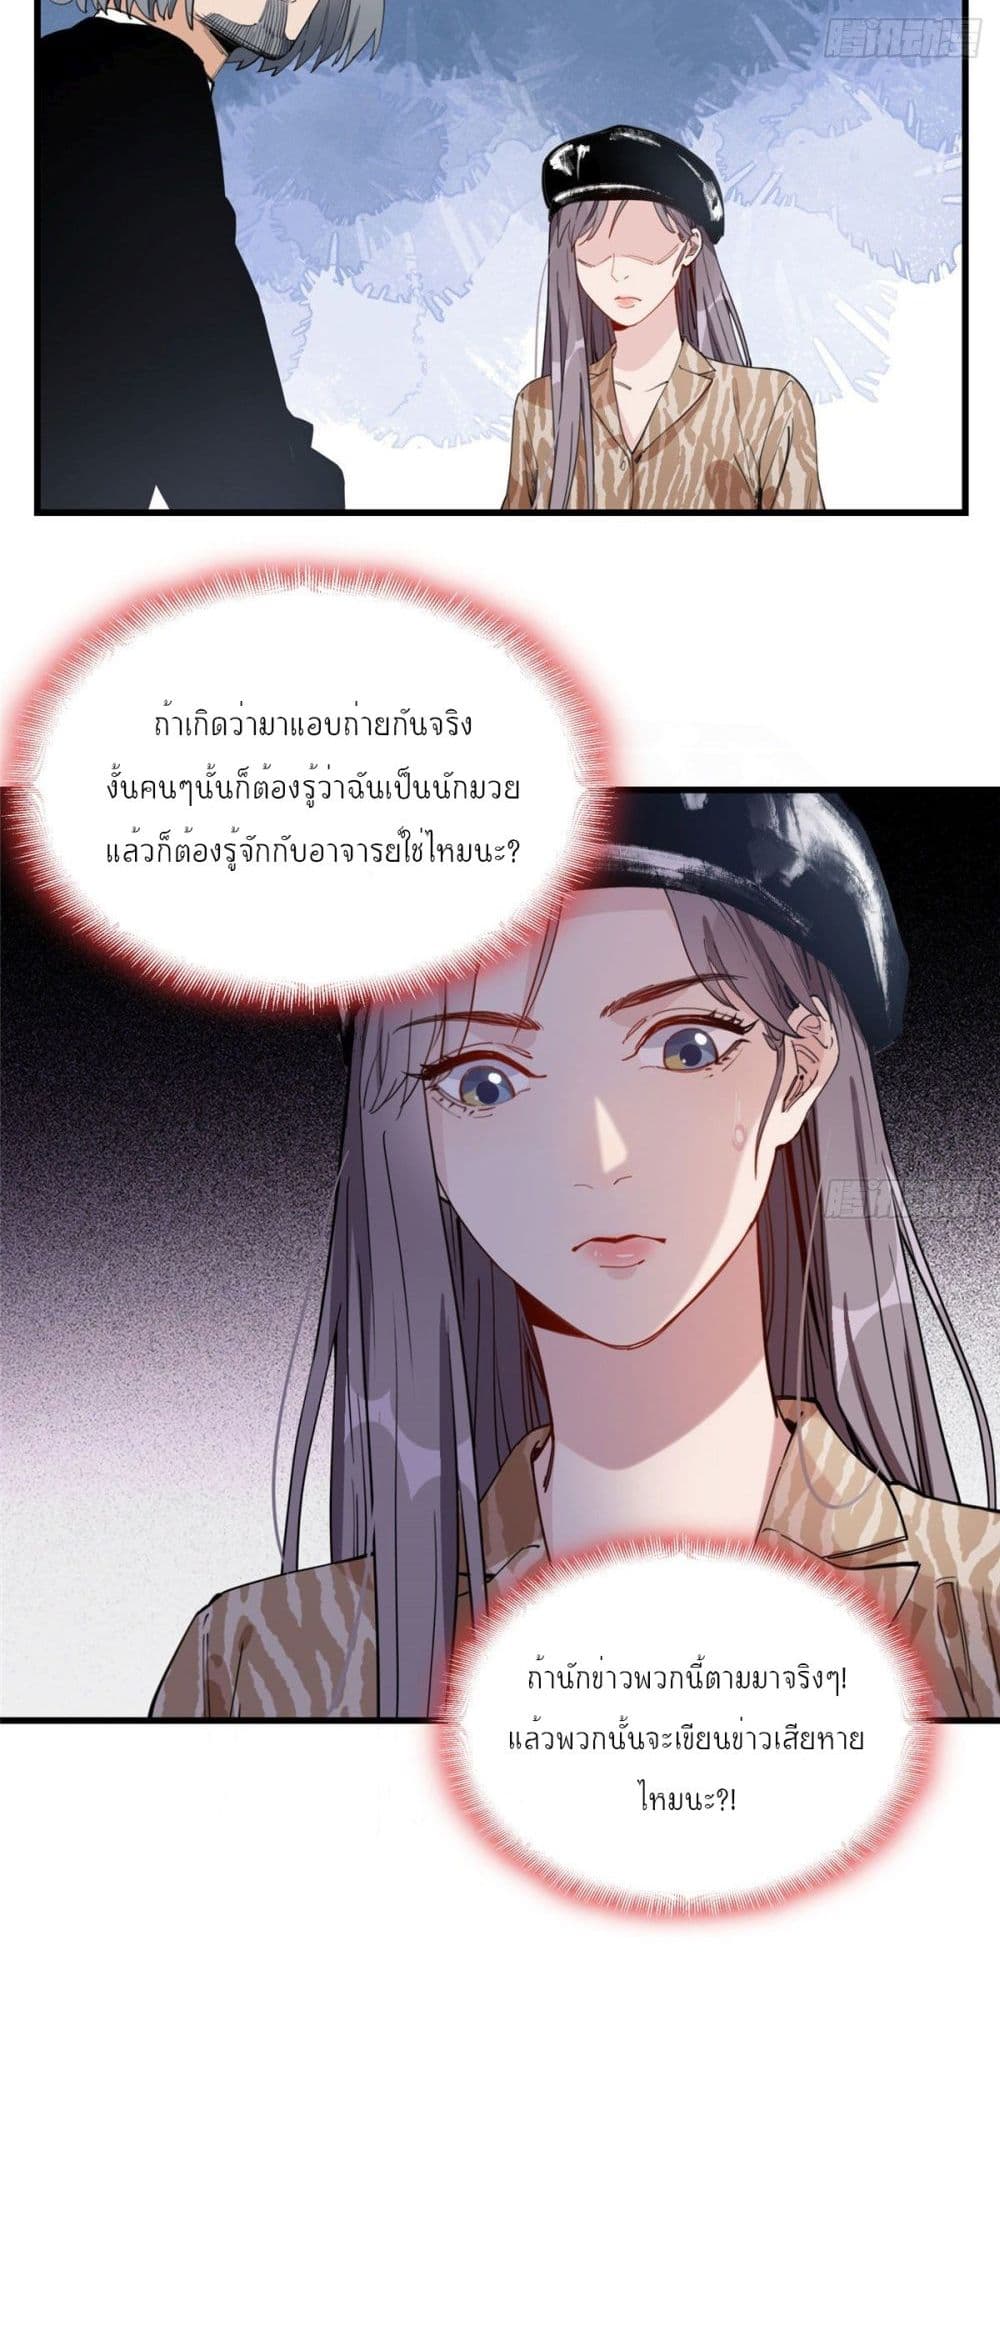 Find Me in Your Heart ตอนที่ 18 (21)